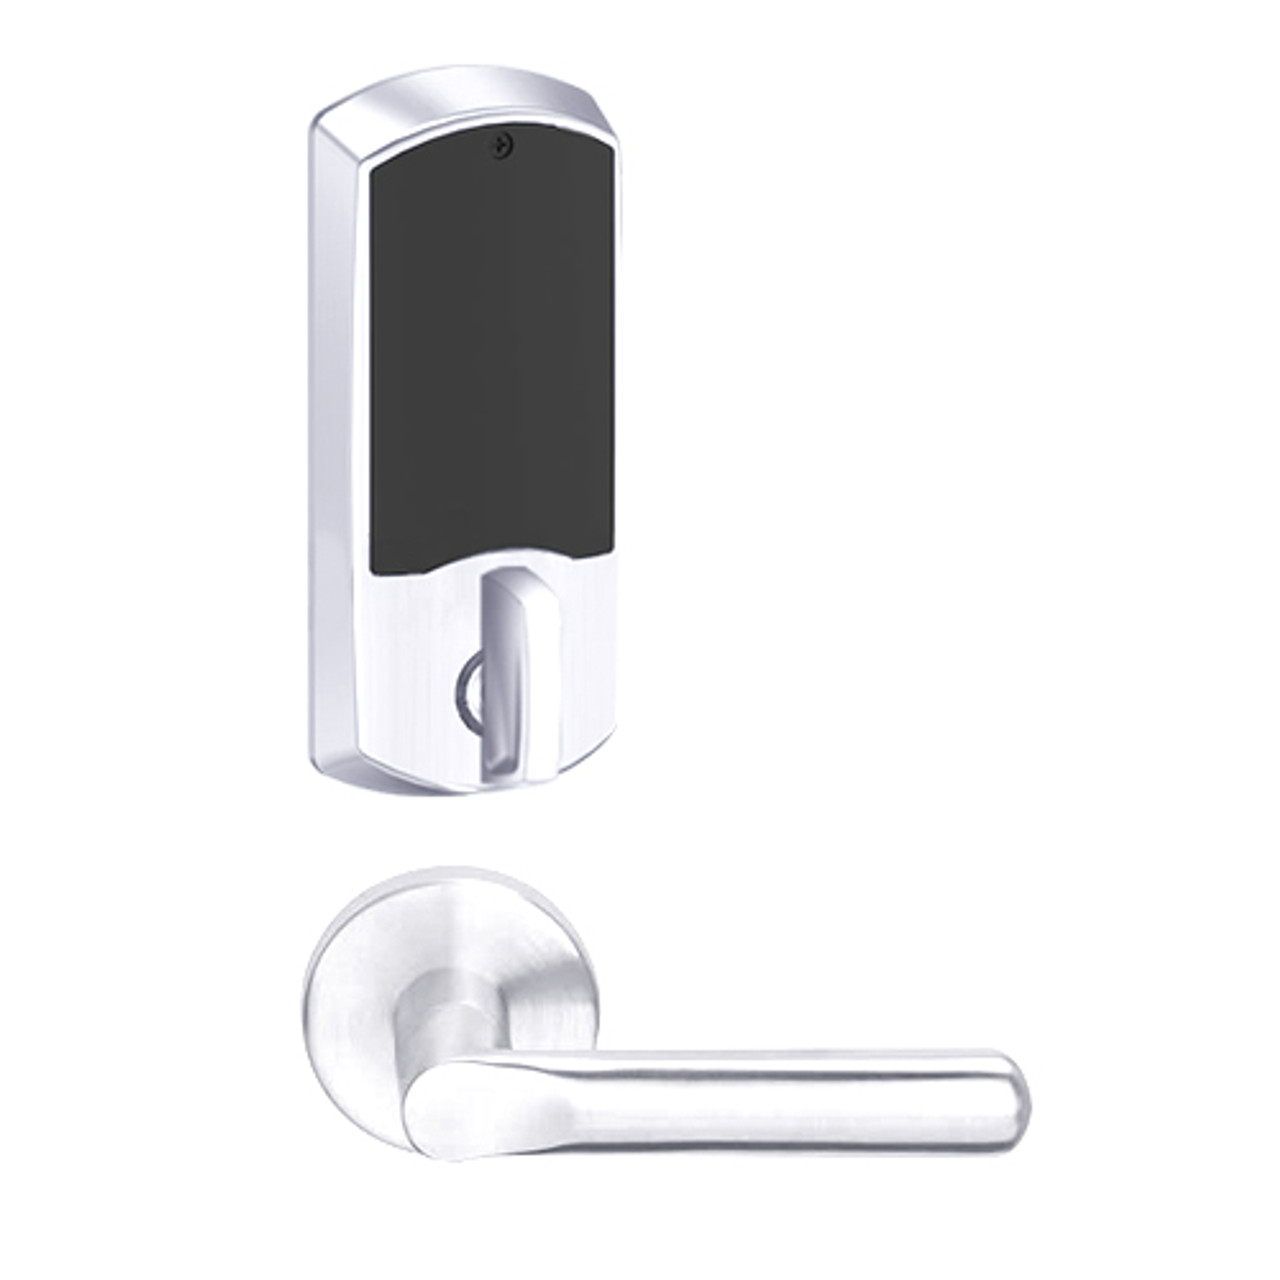 LEMD-GRW-L-18-625-00B Schlage Less Cylinder Privacy/Apartment Wireless Greenwich Mortise Deadbolt Lock with LED and 18 Lever in Bright Chrome